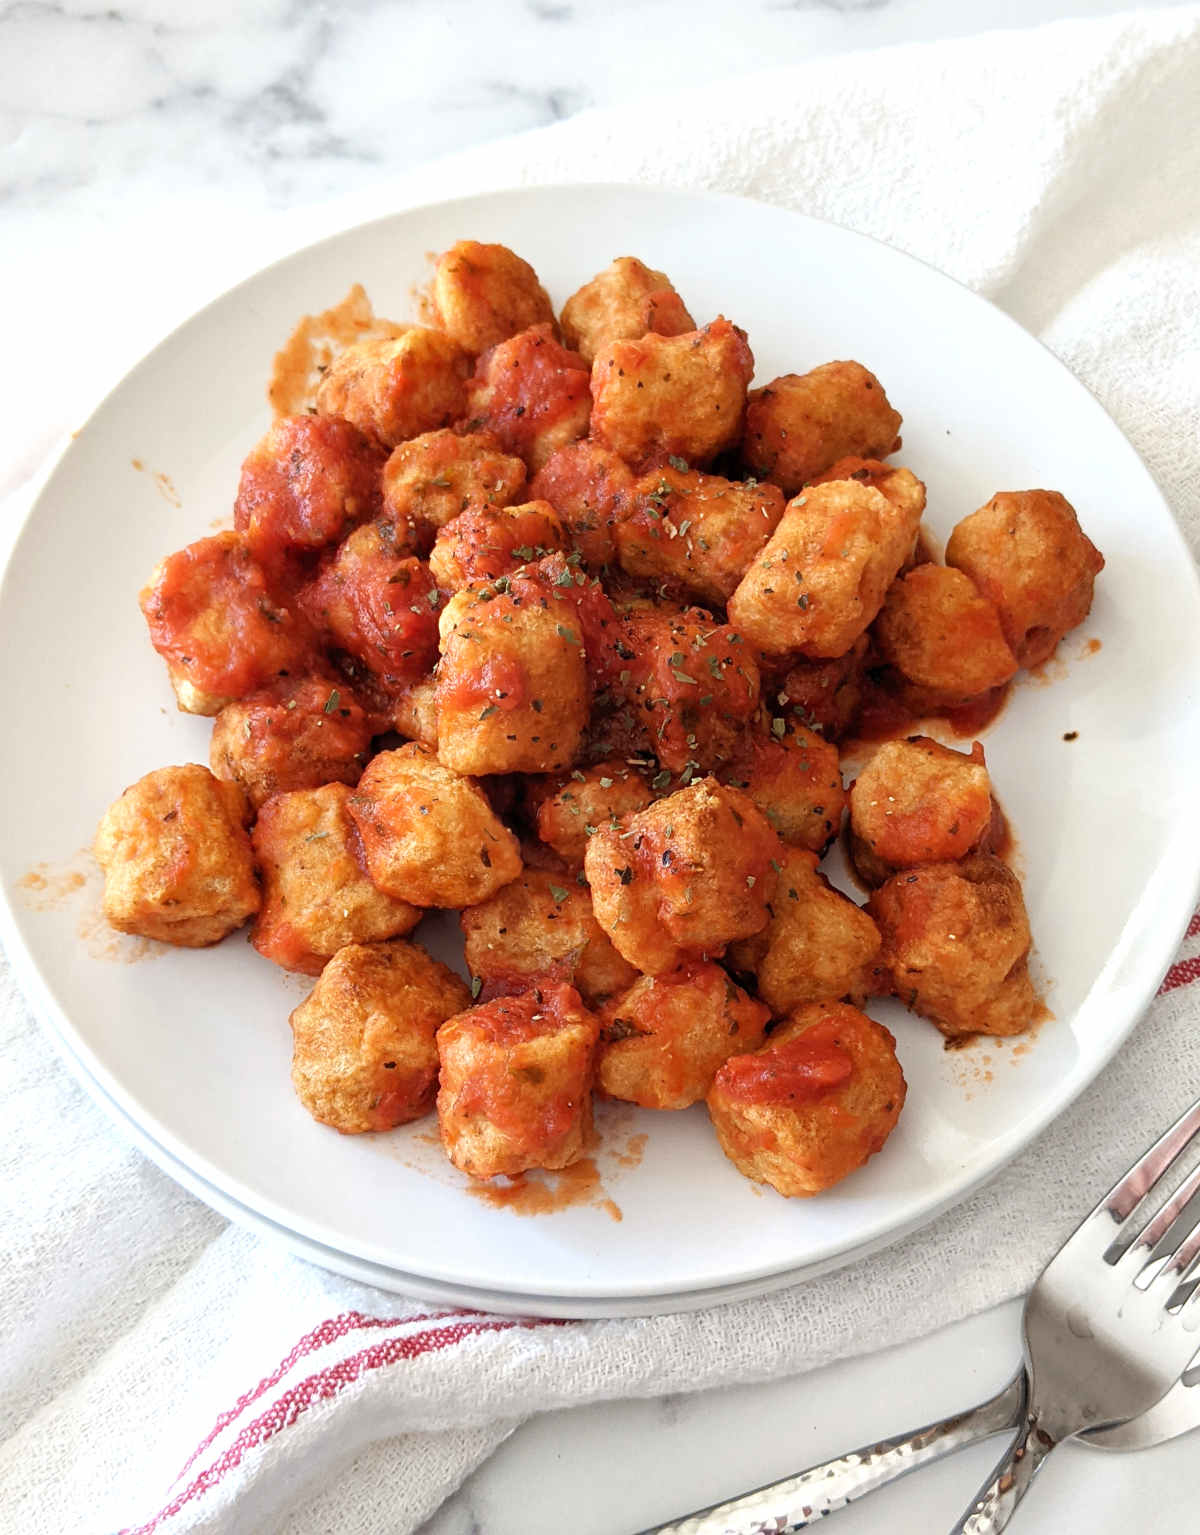 Air fried gnocchi served in a marinara sauce on a plate.